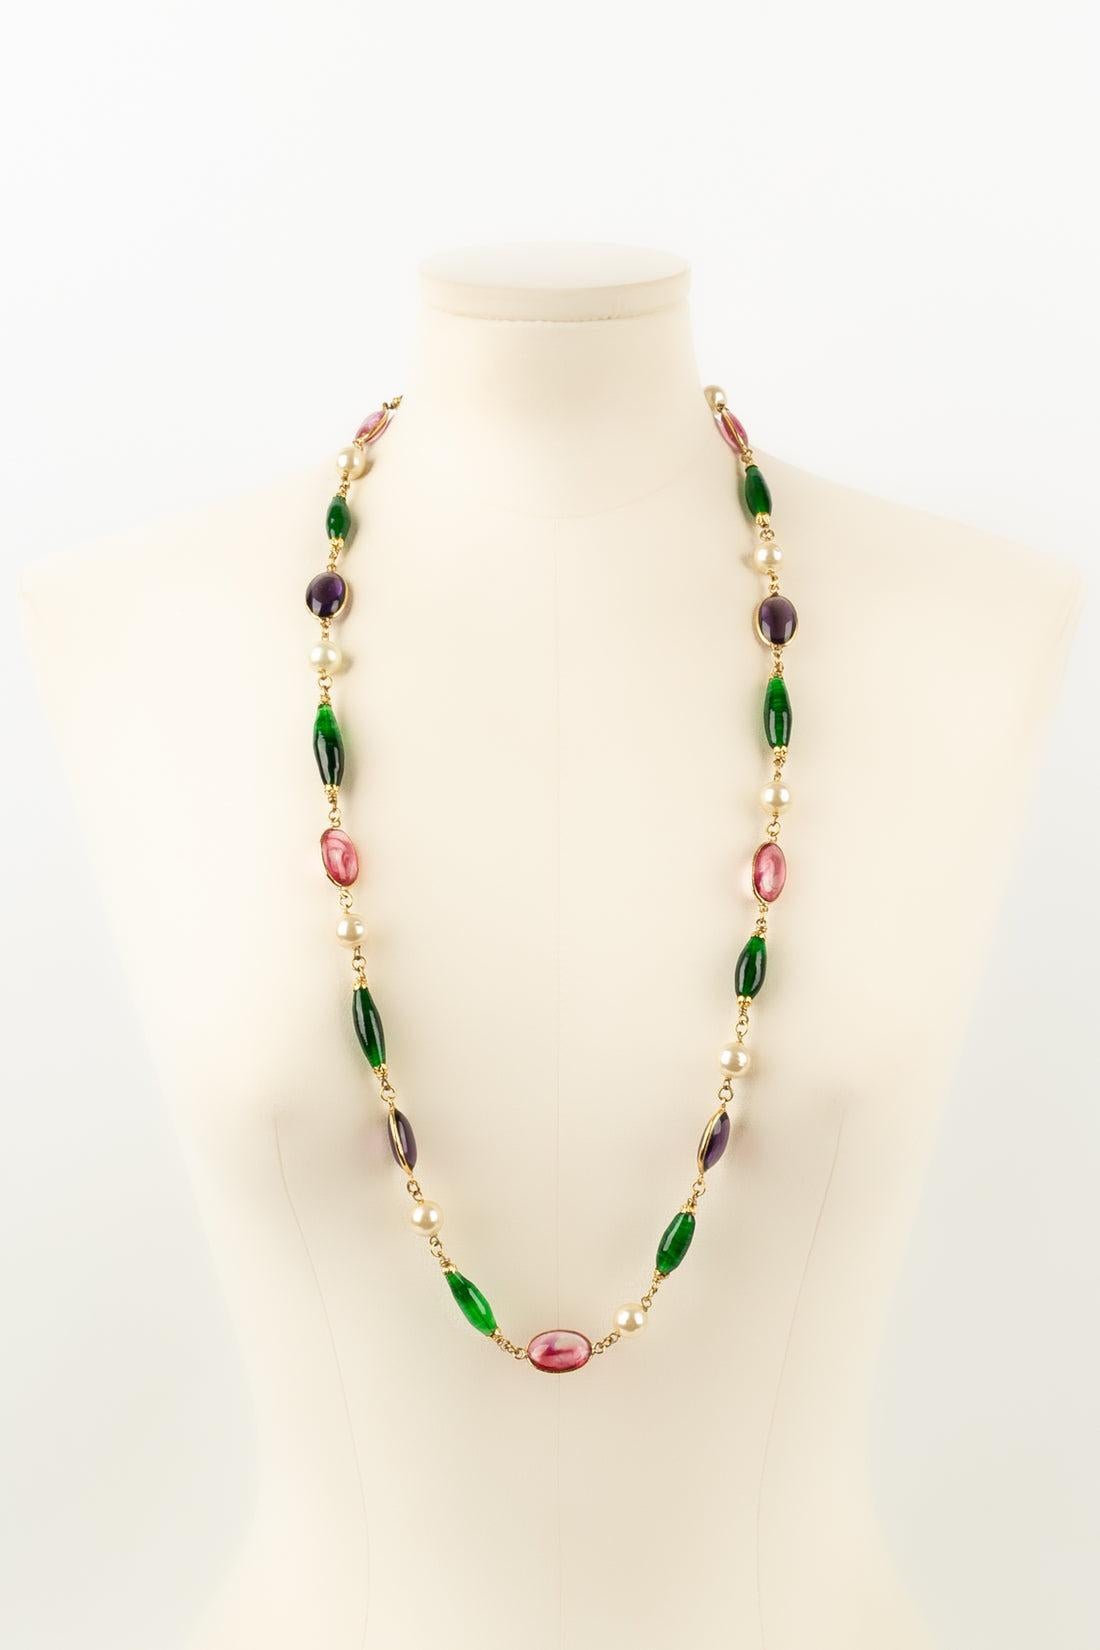 Yves Saint Laurent Necklace in Glass Paste and Pearly Beads For Sale 3